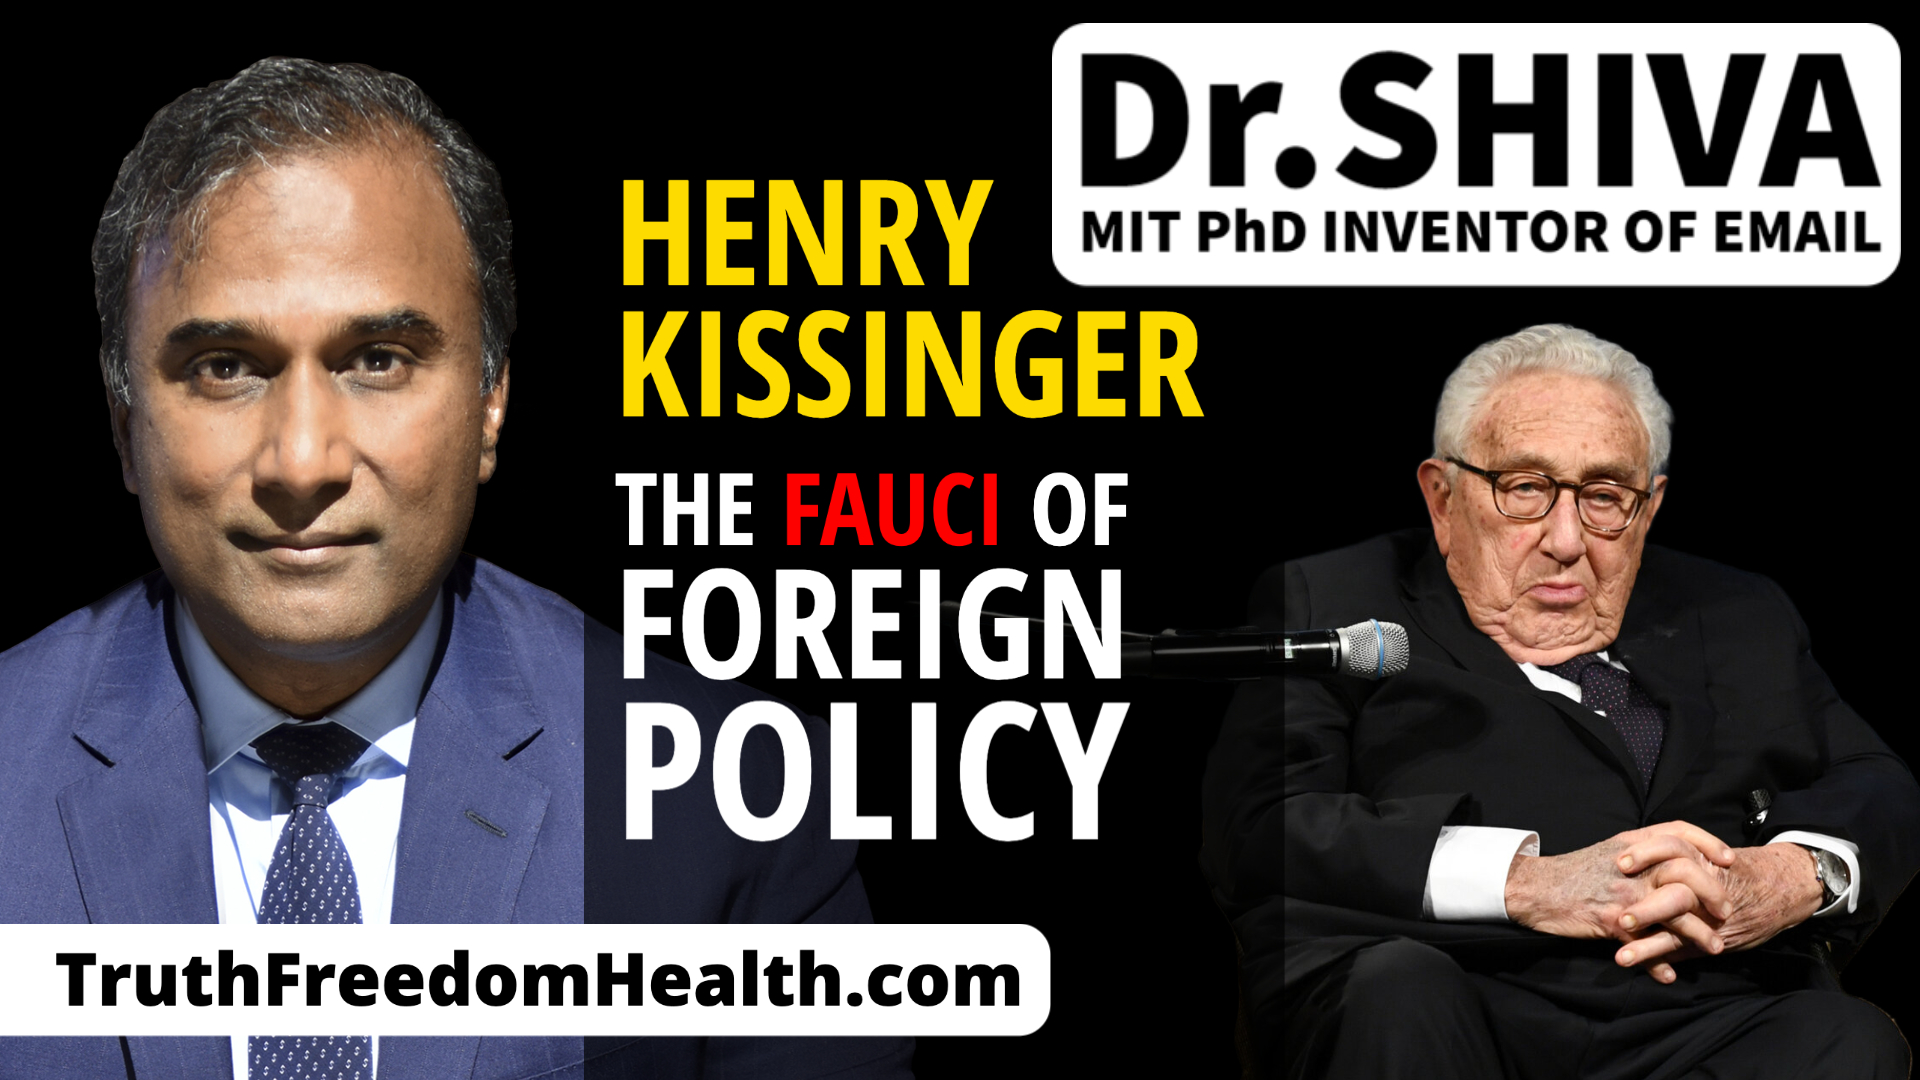 Dr.SHIVA LIVE: Henry Kissinger - The Fauci of Foreign Policy